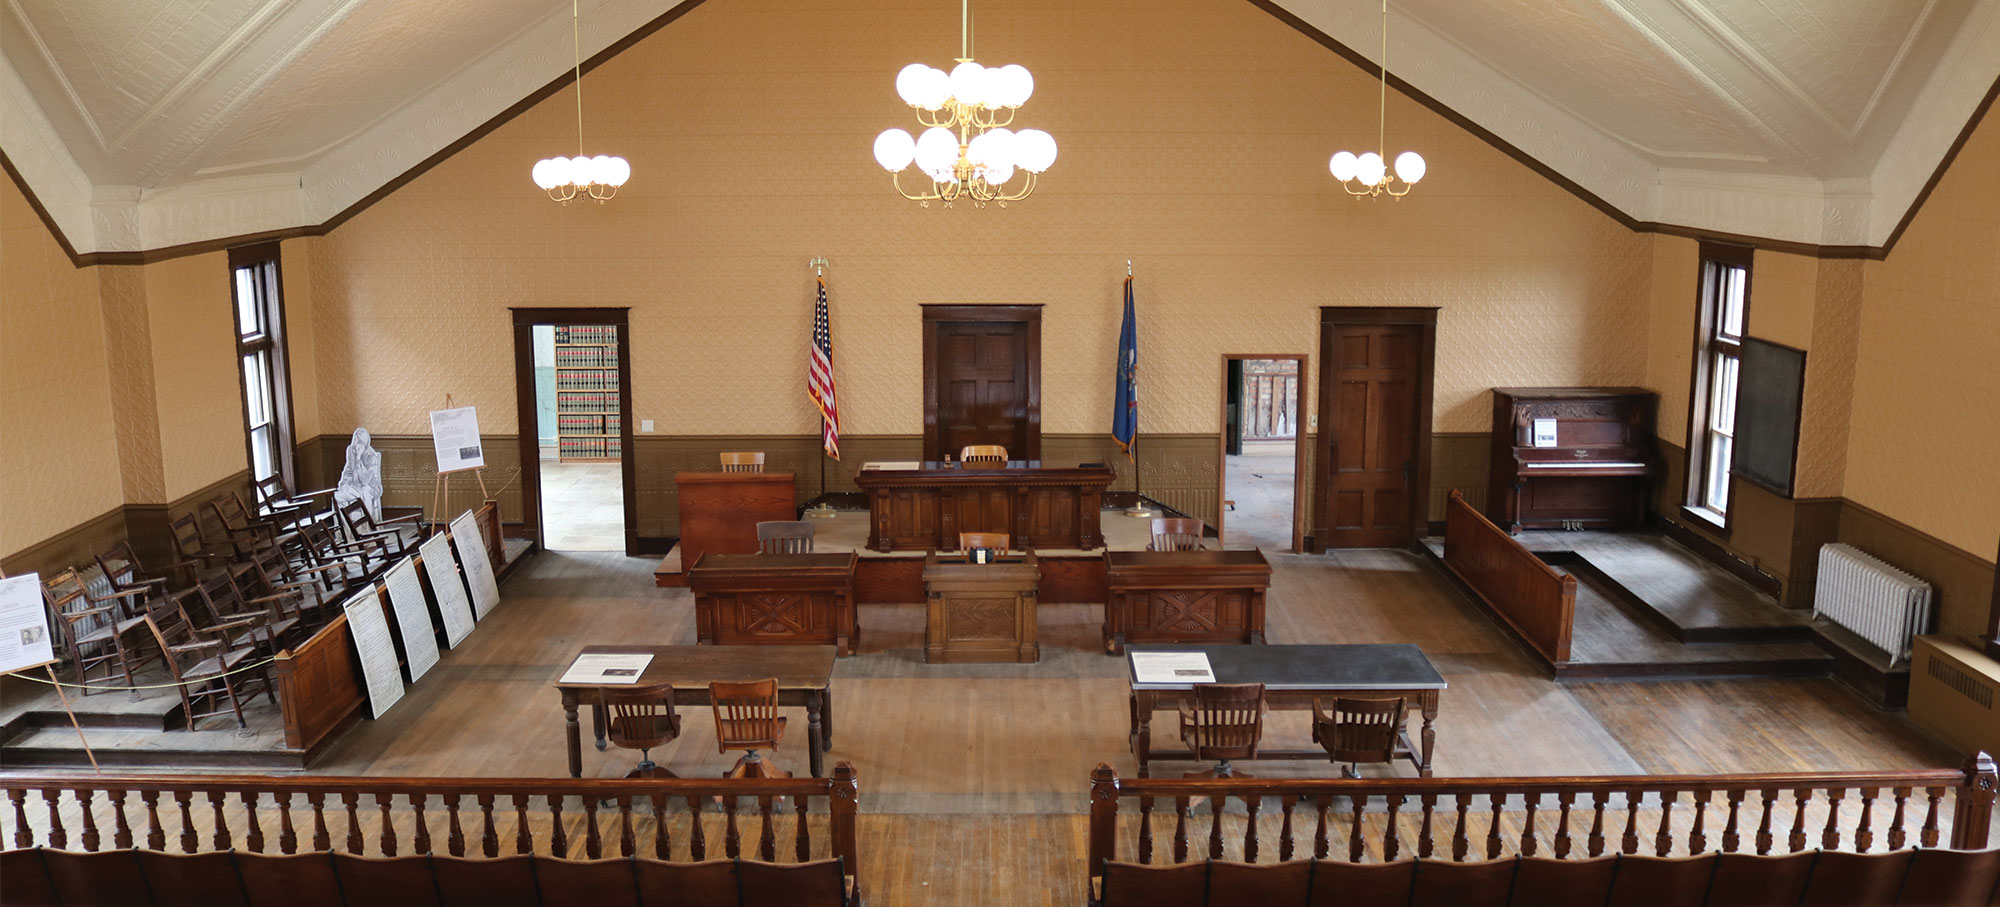 Interior of an old courthouse looking down from the balcony